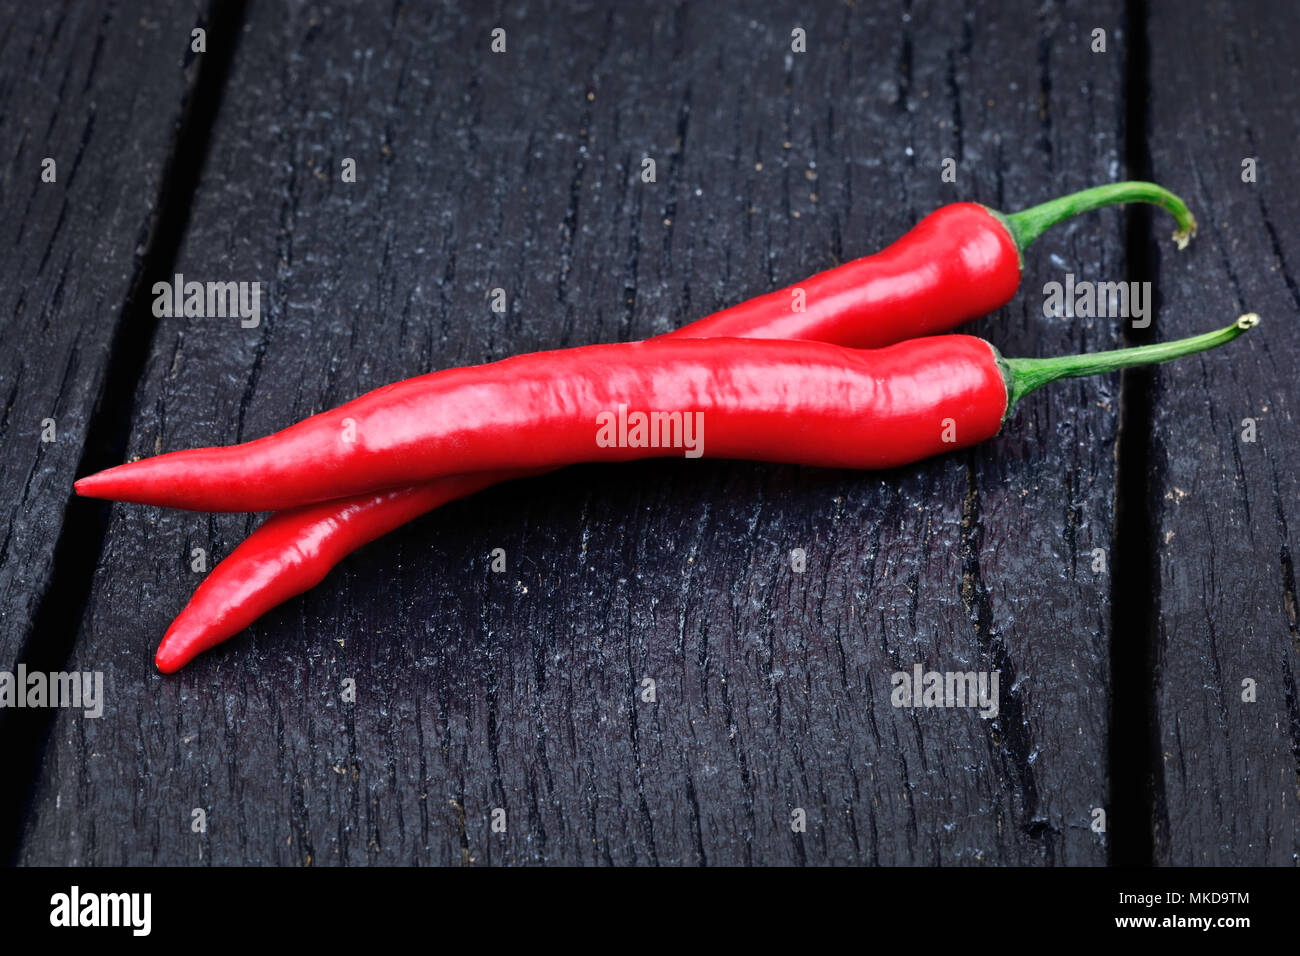 Chili pepper on black wood table Stock Photo